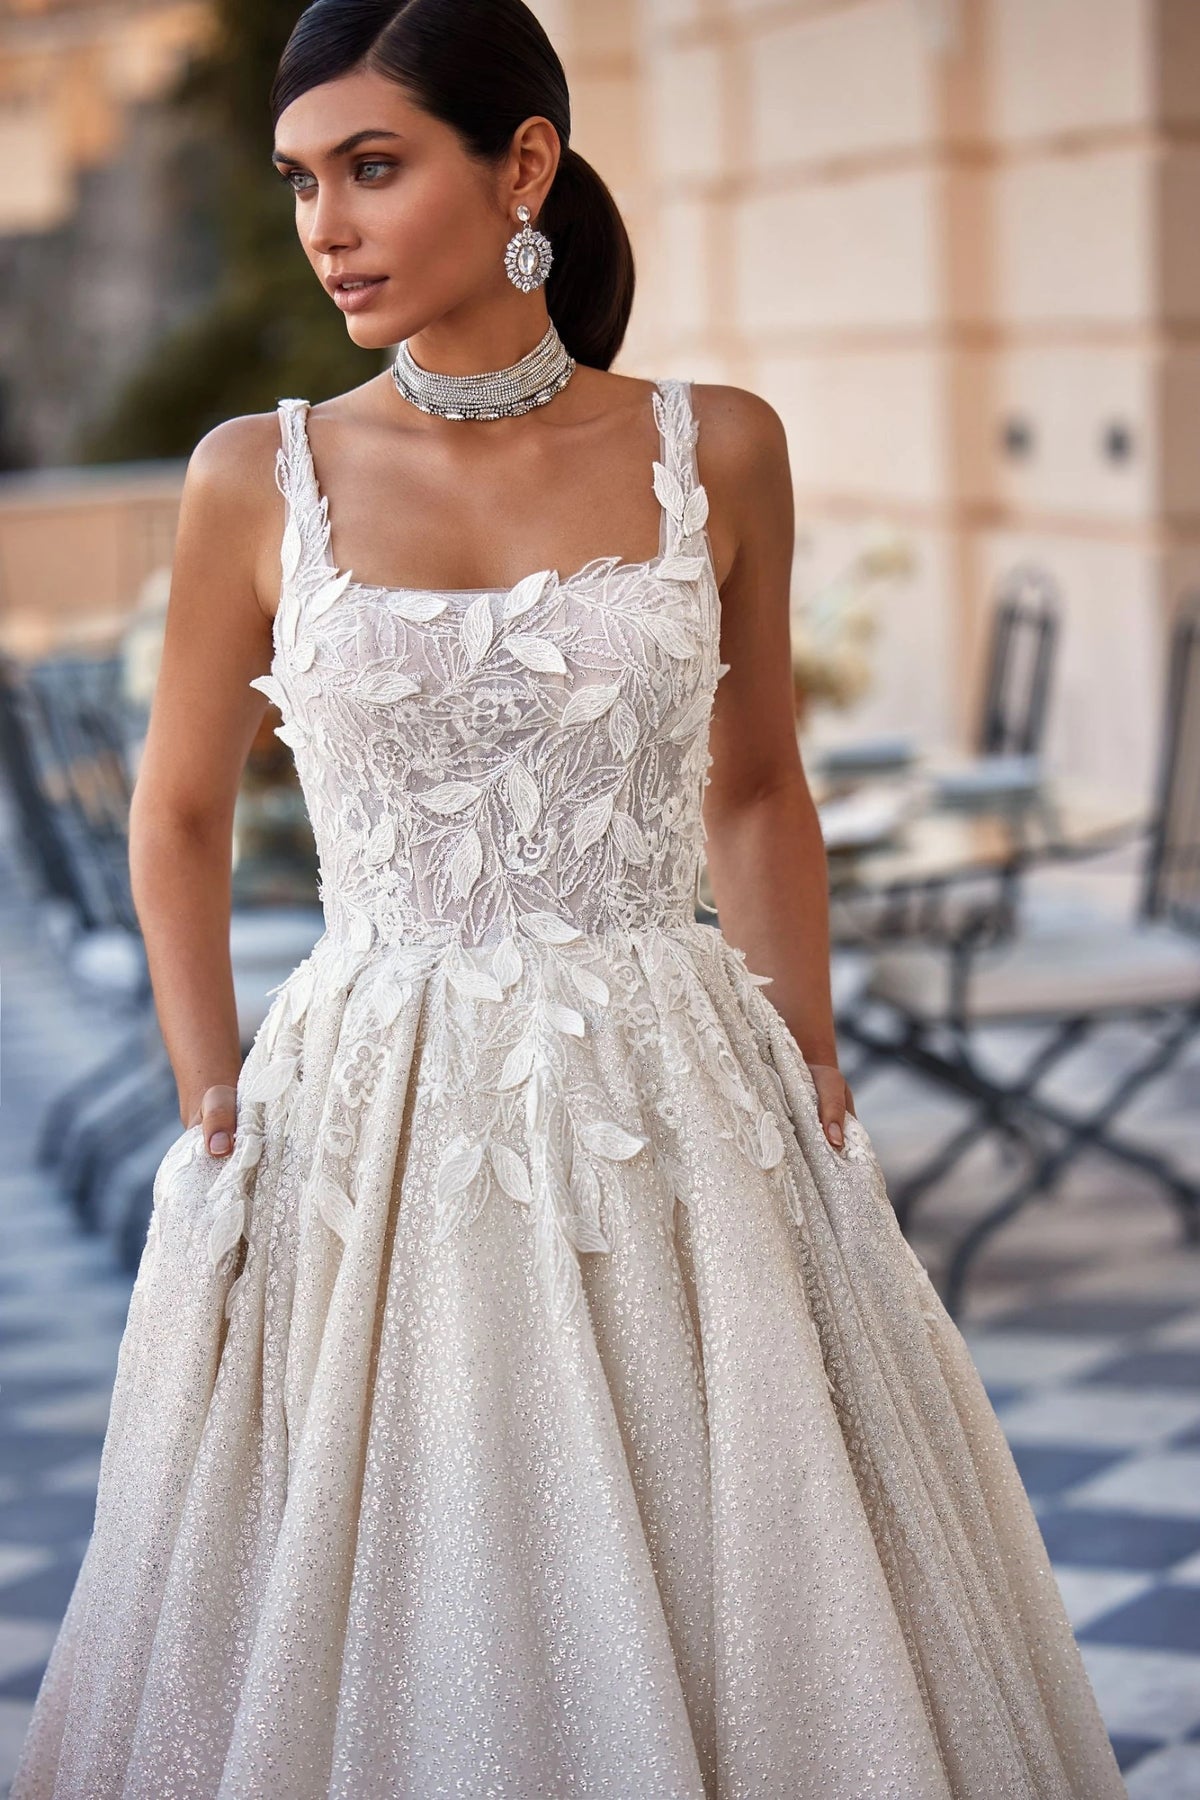 Full Pleated Aline Silhouette Wedding Dress Bridal Gown Sparkle Square Neckline Sleeveless with Straps Open Square Back